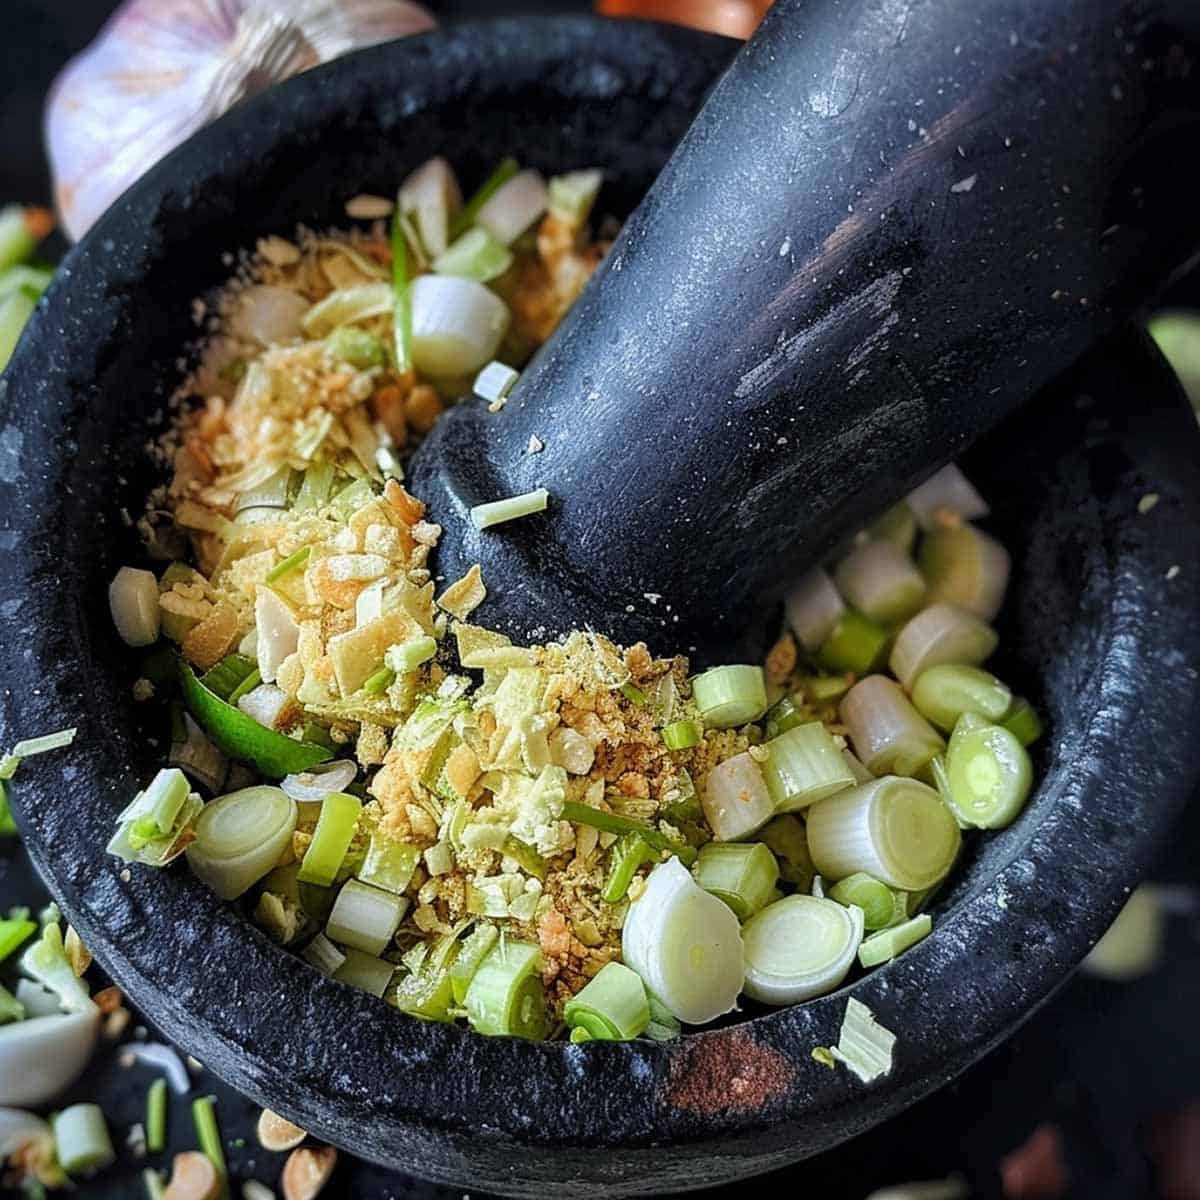 Garlic, shallots, lemongrass, galangal, and kaffir lime zest being ground with mortar and pestle to make chili paste